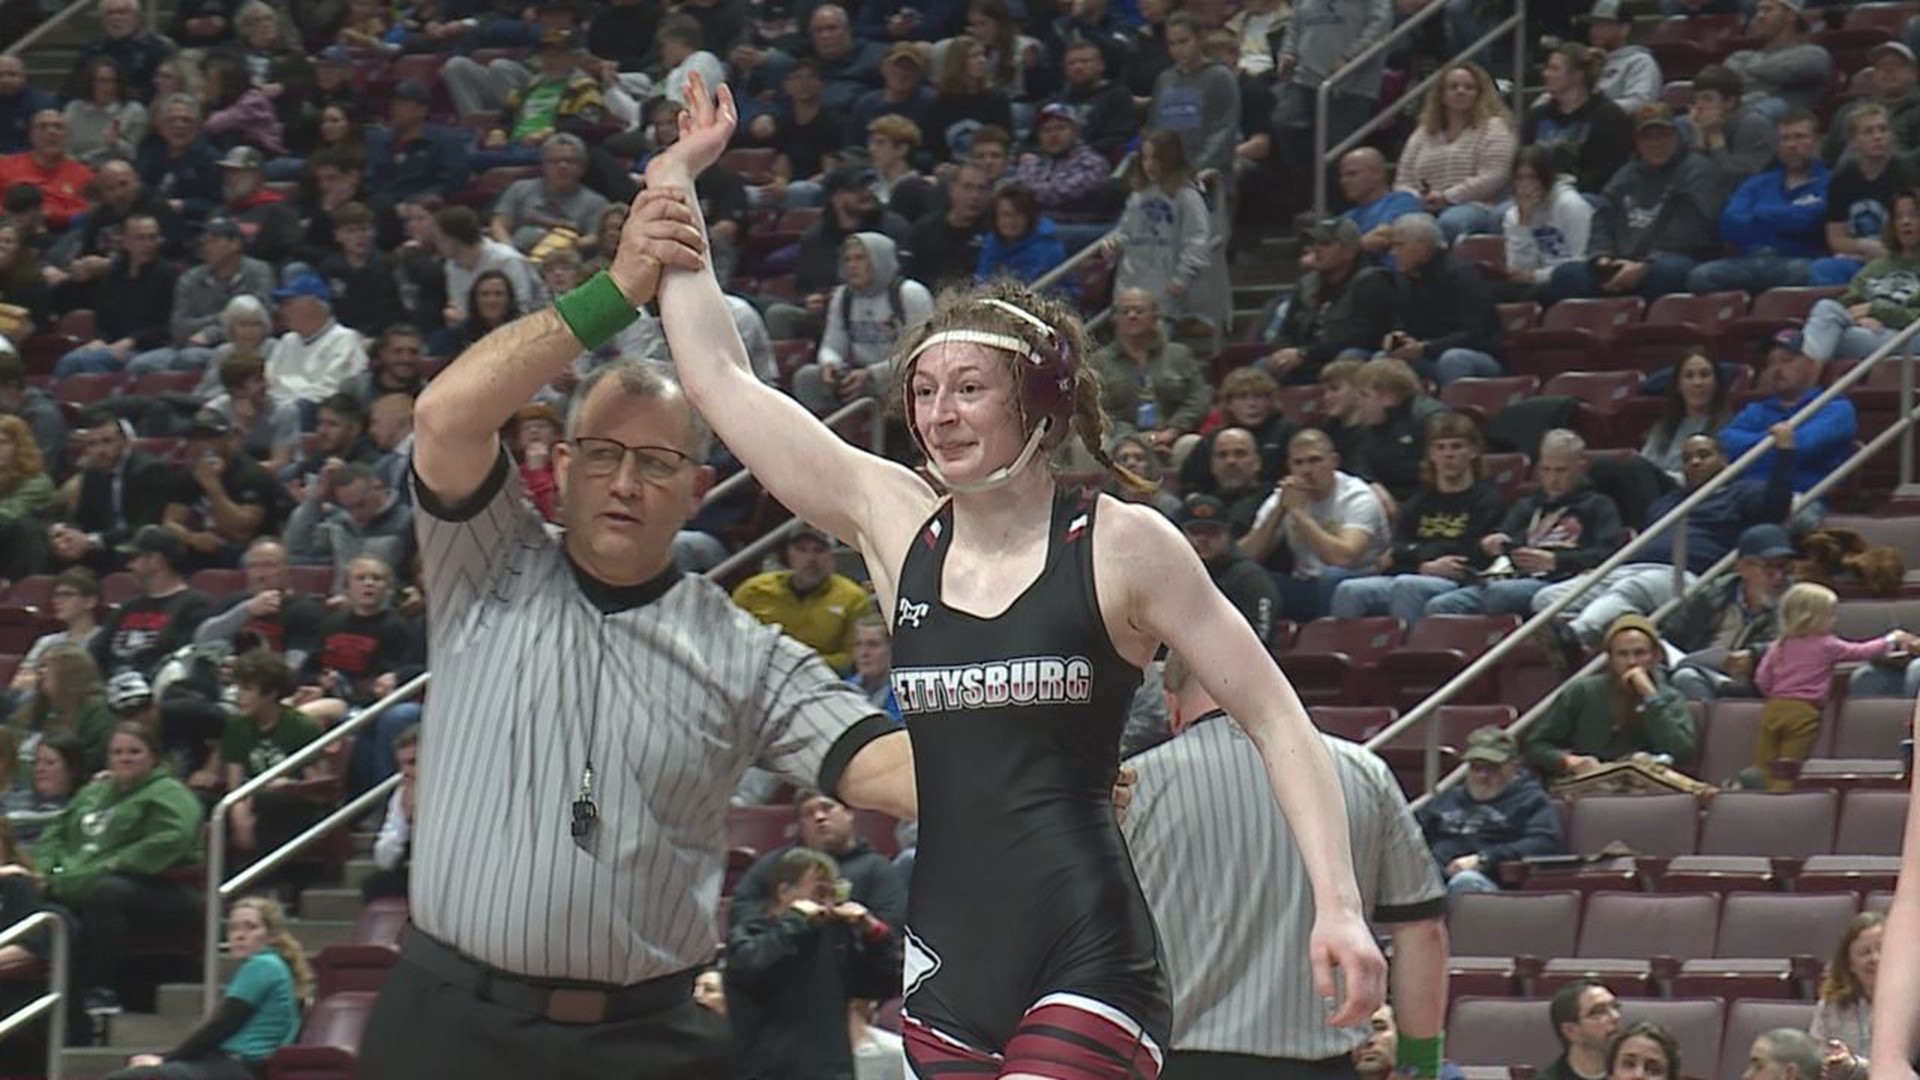 Zoey Haines is the third member of the Haines family to win a PIAA state championship.